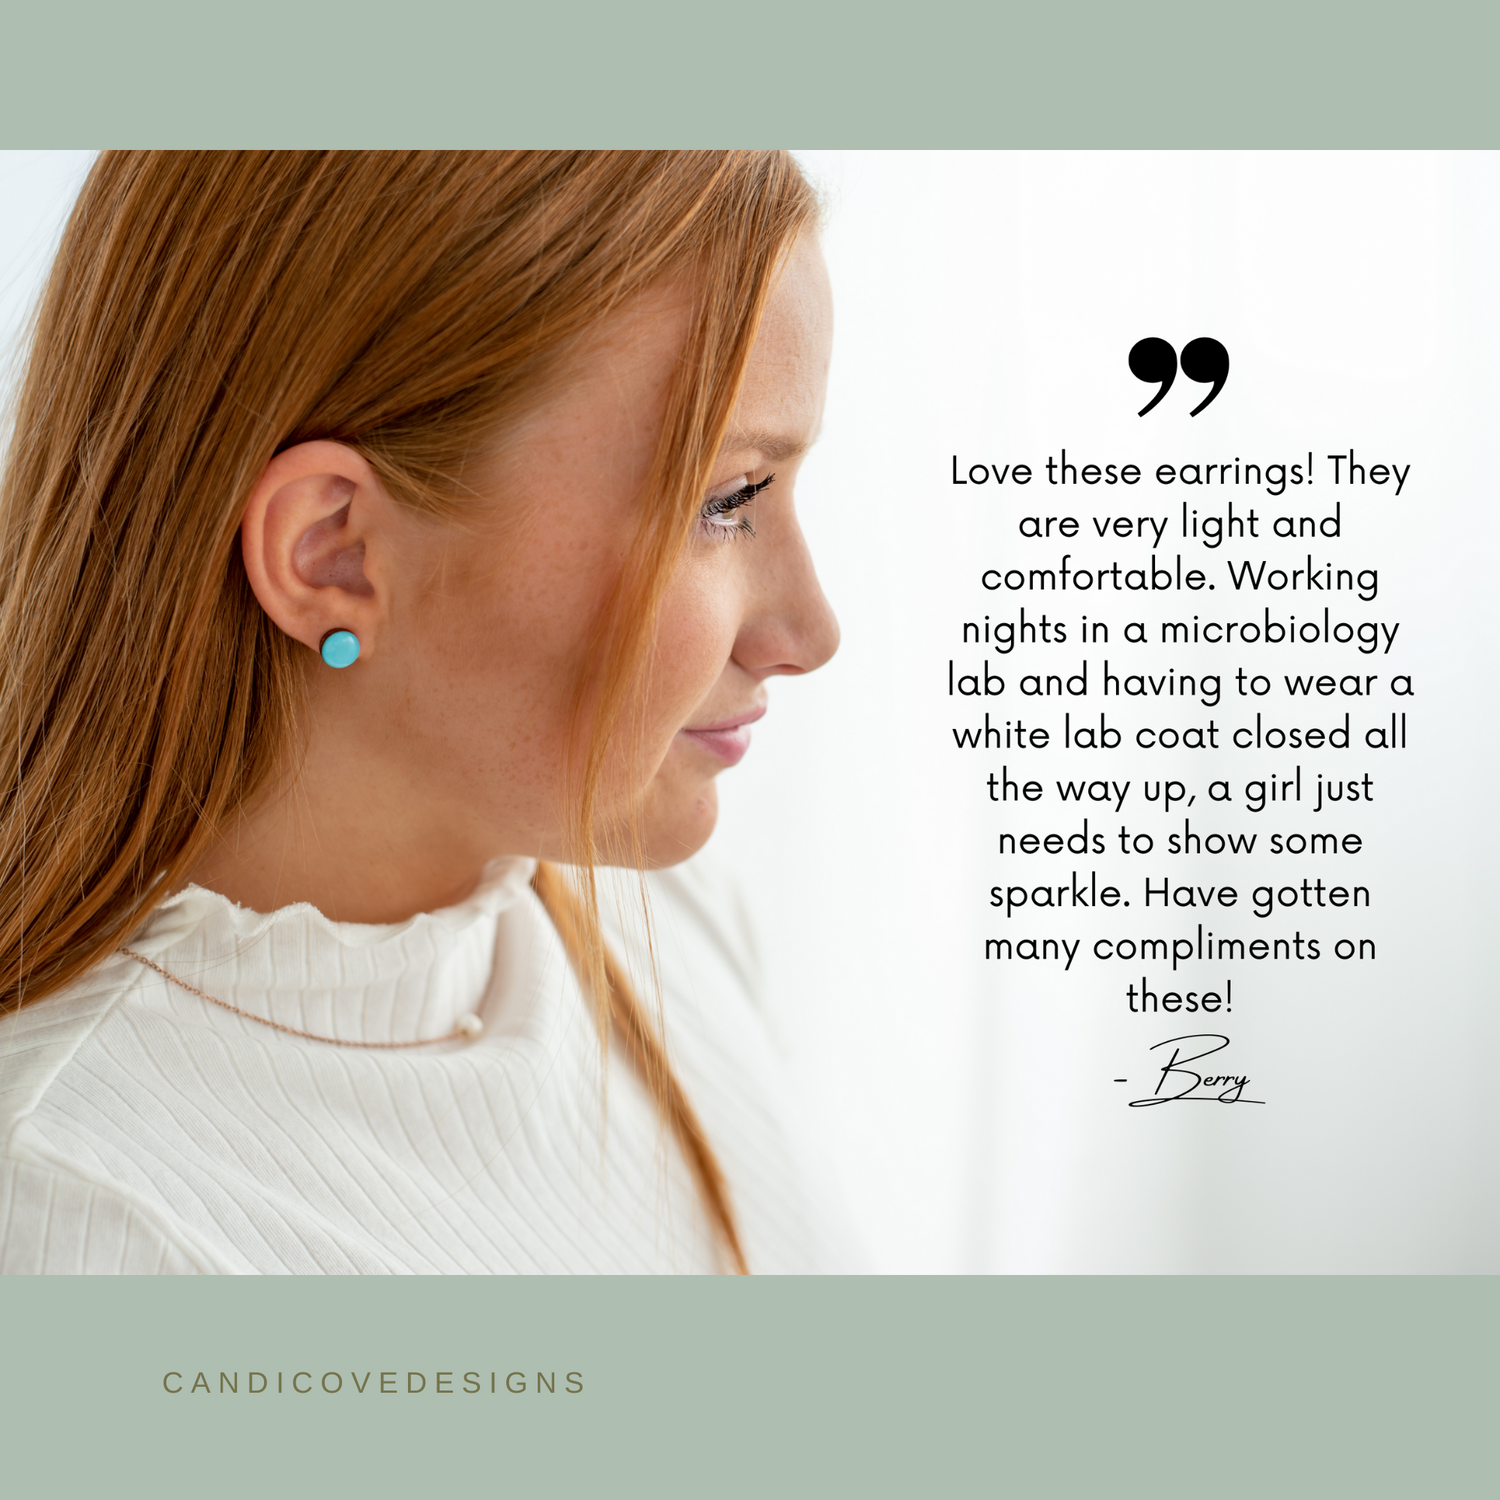 Candi Cove Designs Everyday Simple Stud Earrings Review: Teal Color Dot Earrings, Ideal for Sensitive Ears and Perfect for Adding a Pop of Color to Your Look, Modeled on a Red-Haired Woman for a Realistic Representation